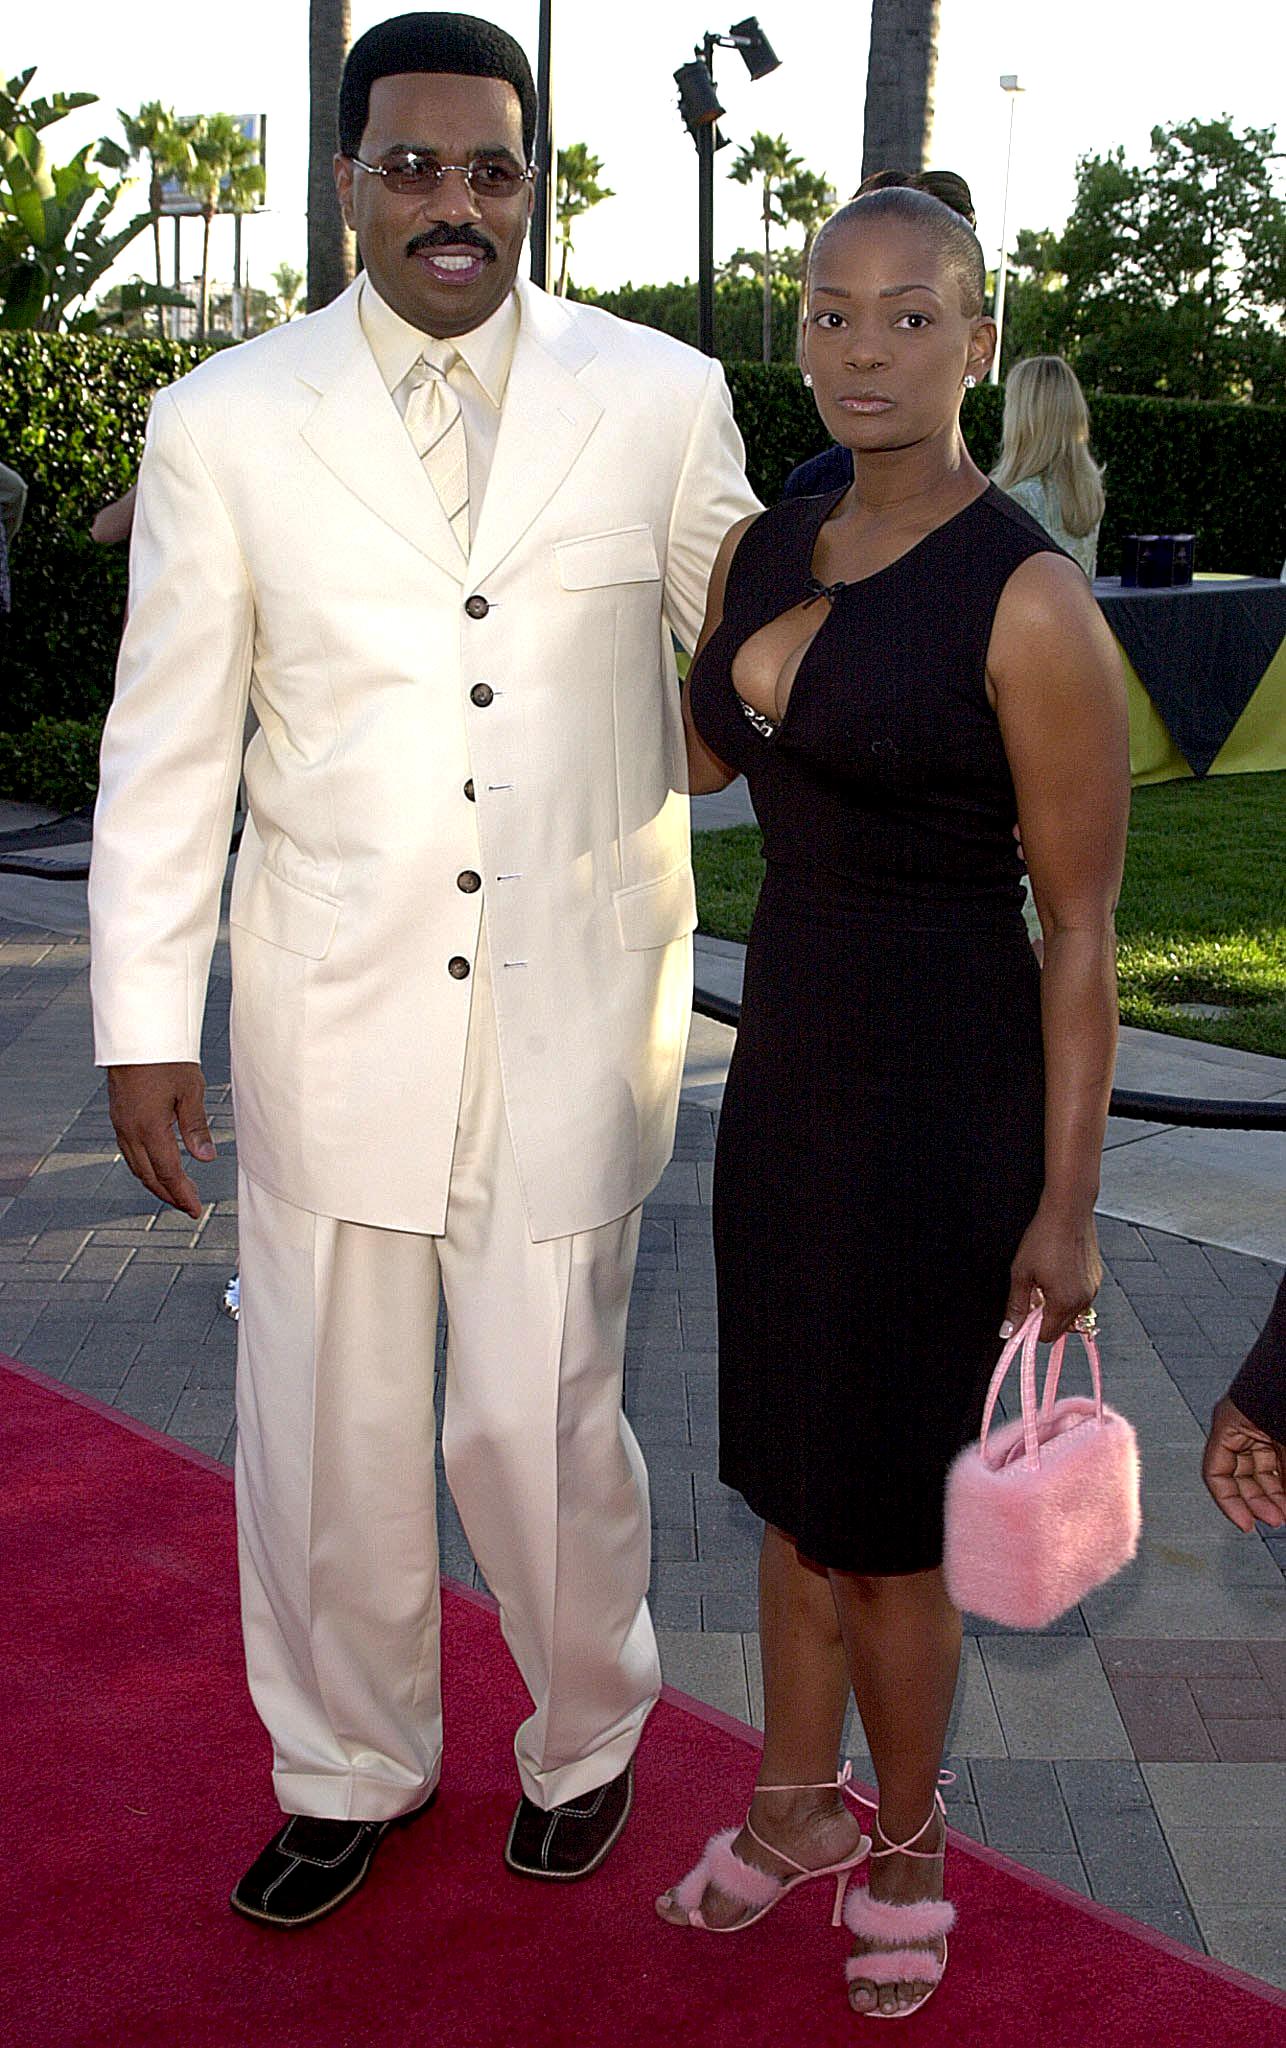 Steve Harvey and Mary arrive at the premiere of Spike Lee's new film "The Original Kings of Comedy" in Hollywood, CA, on August 10, 2000. I Source: Getty Images